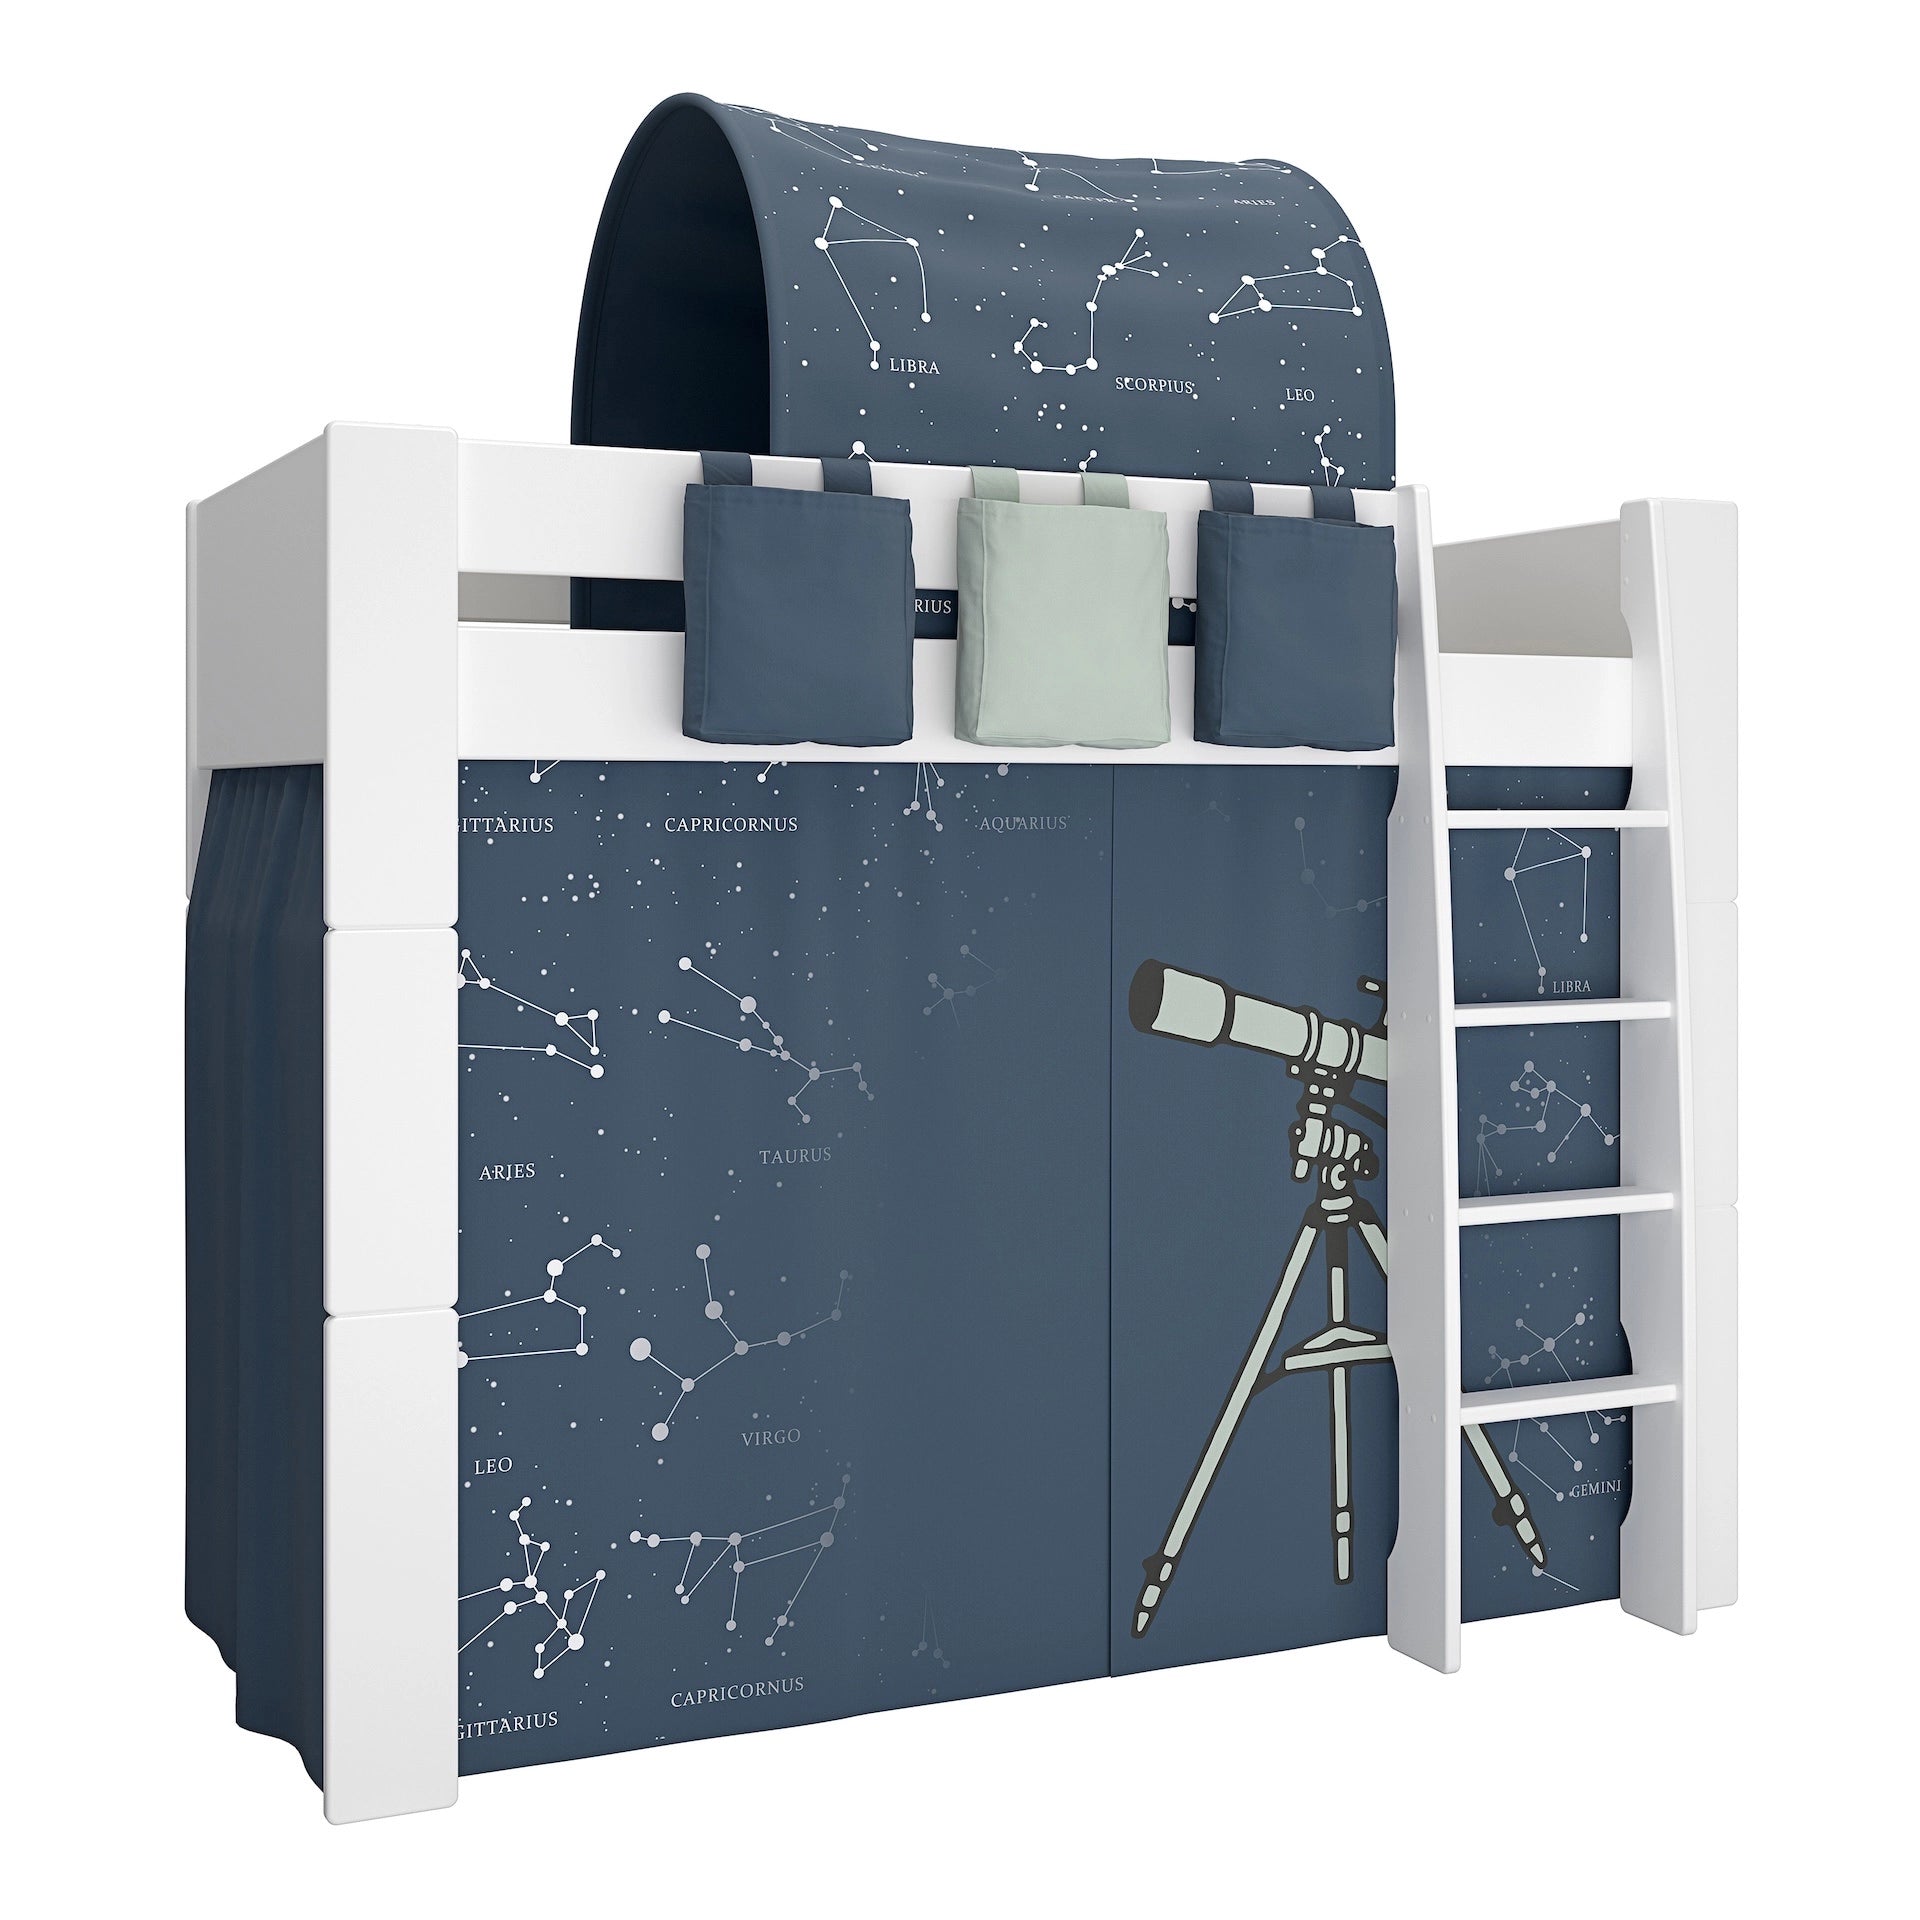 Furniture To Go Steens For Kids High Sleeper in Folkestone Grey, Includes - Universe Tent + Tunnel + 2 Pockets in Blue + 1 Pocket in Green